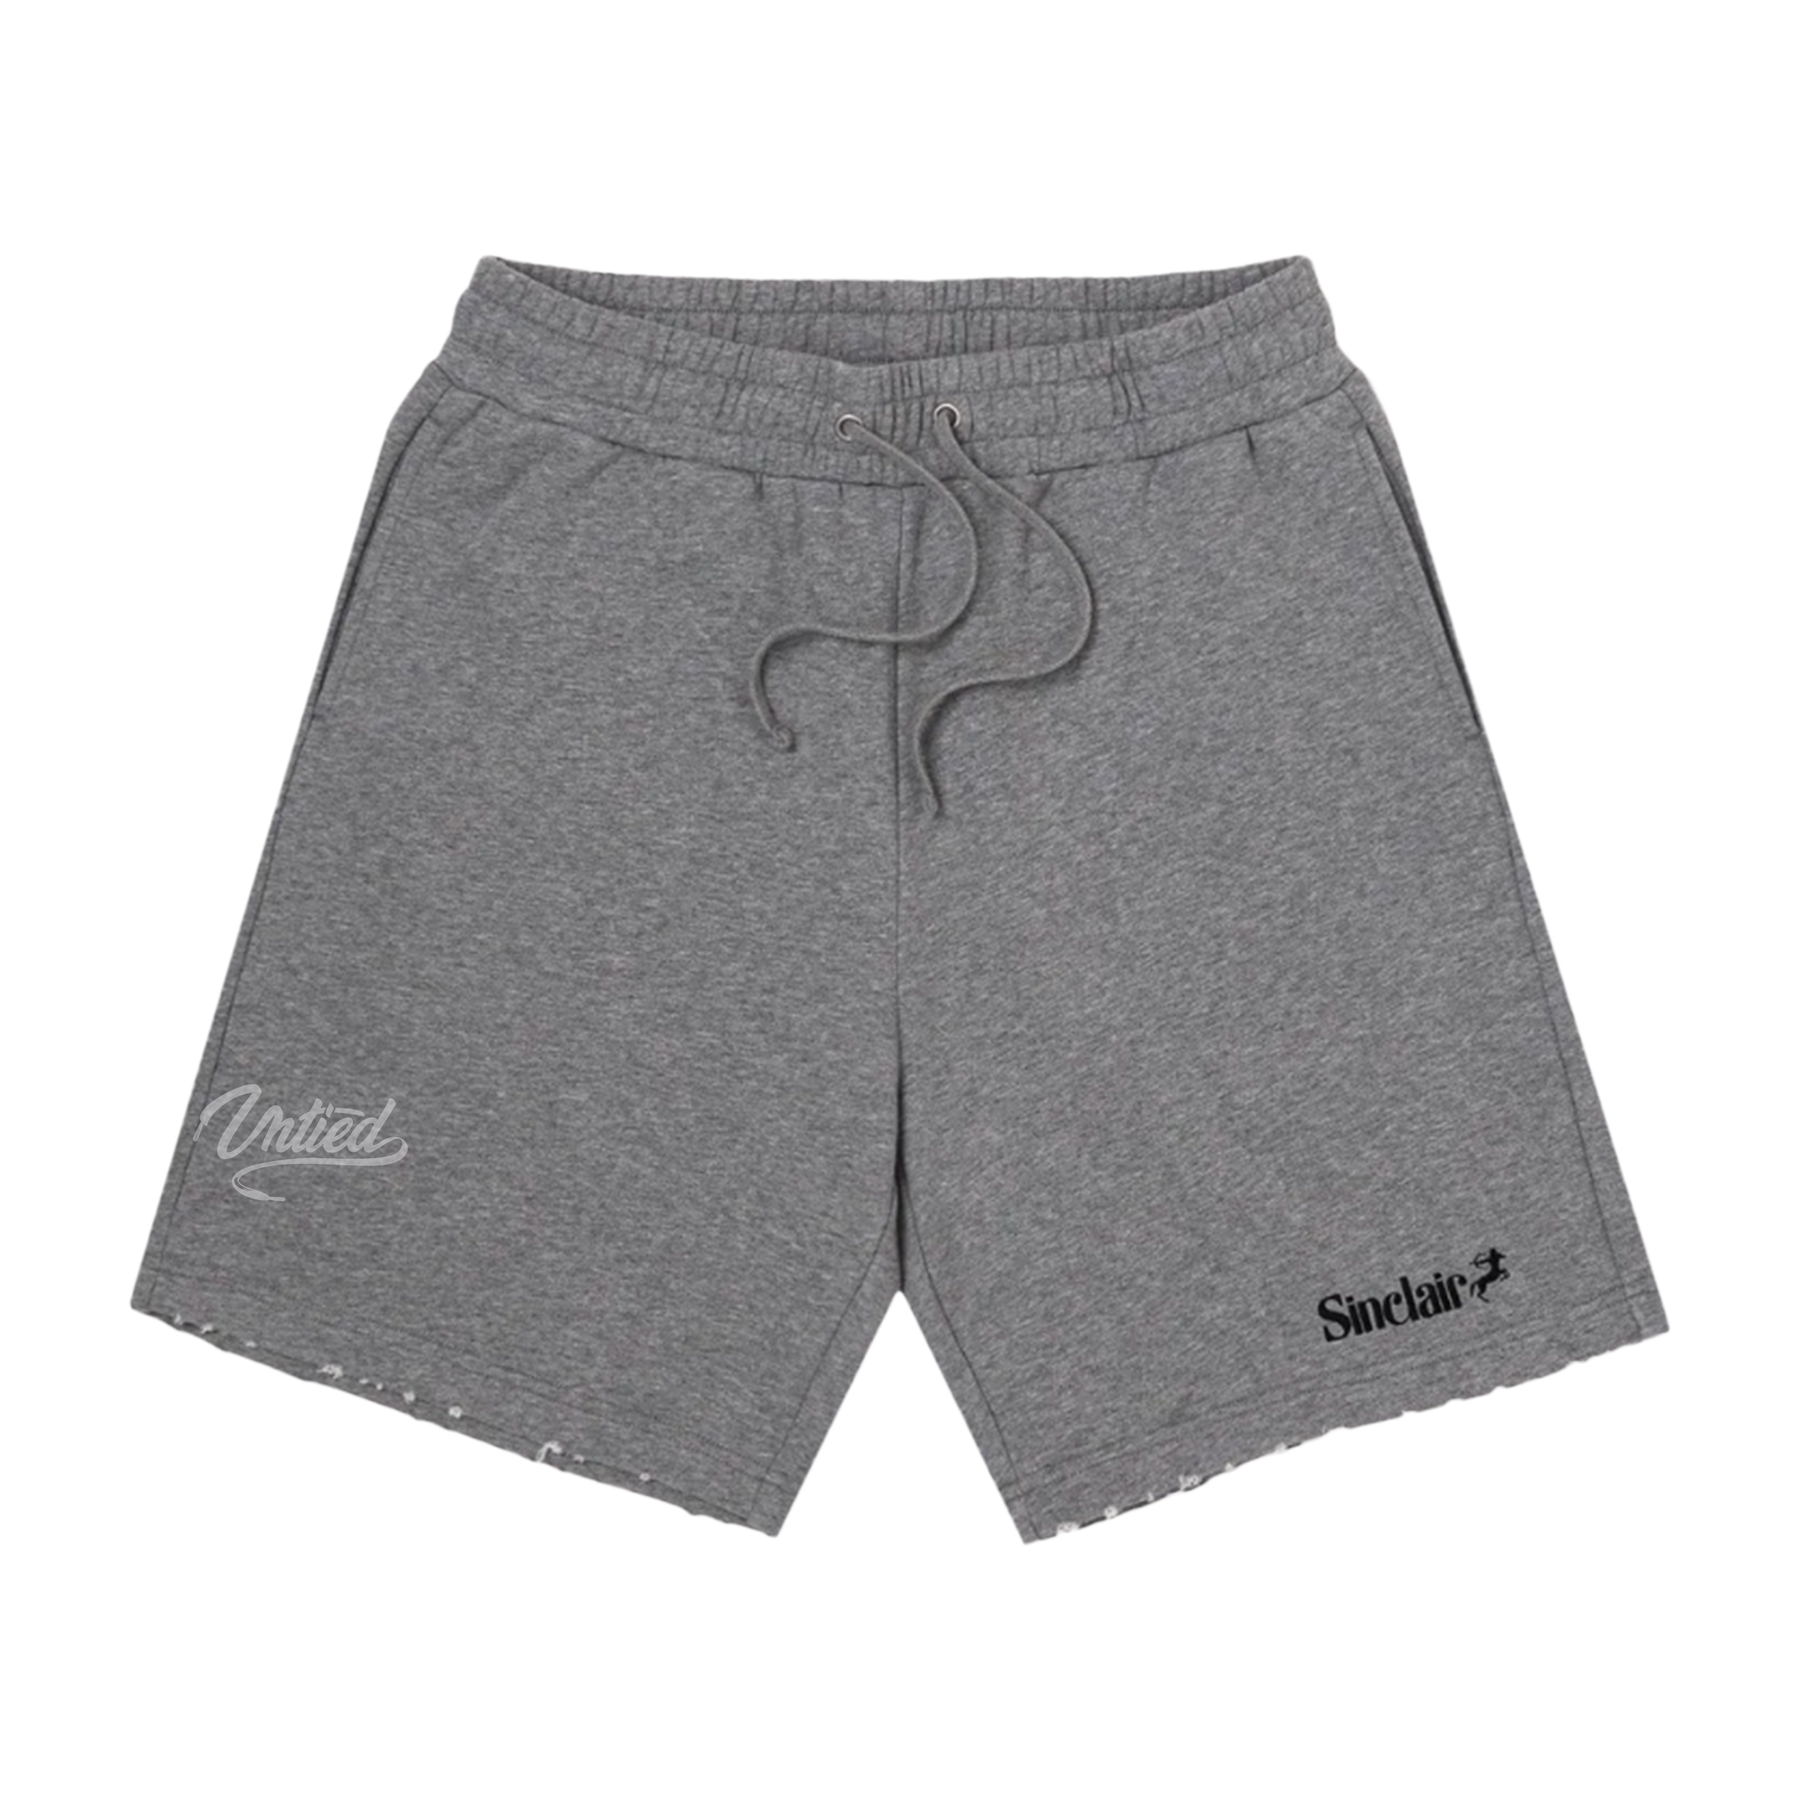 Sinclair French Terry Shorts "Grey"